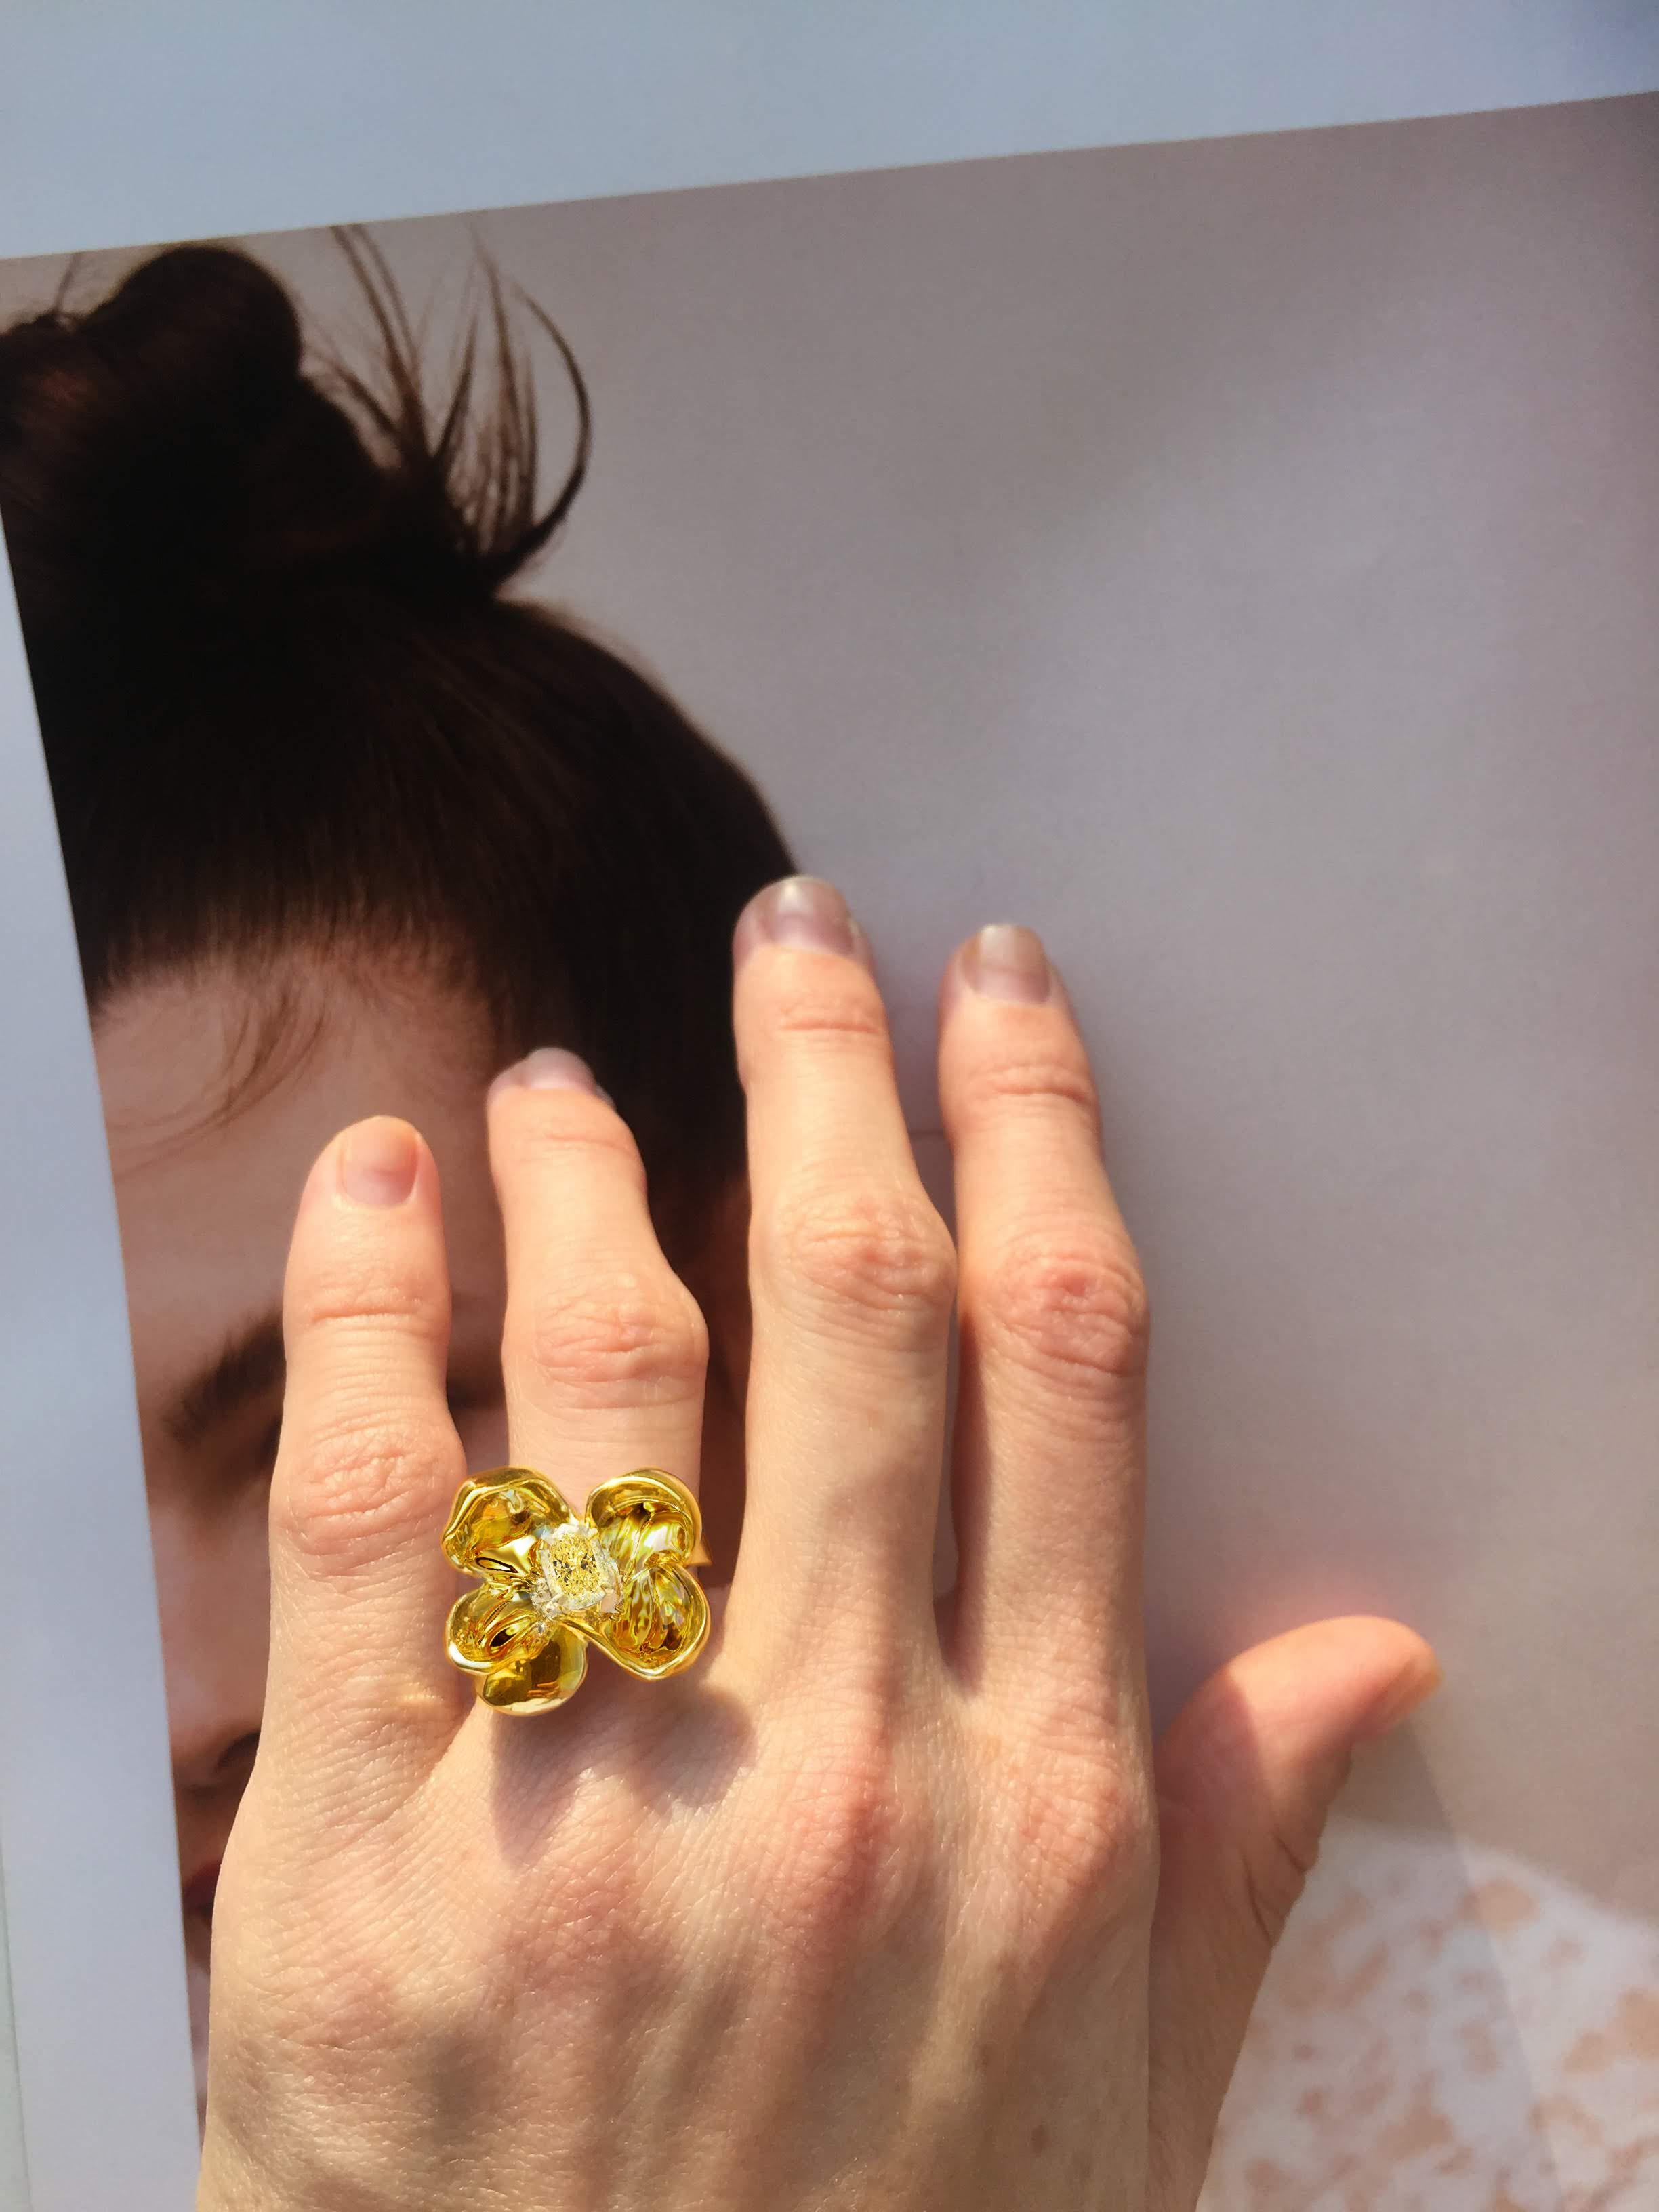 This Magnolia Flower engagement or cocktail ring is made of 18 karat yellow gold and features a big certified yellow diamond with great characteristics. Certificate is available upon request. The crushed ice cushion shape is the best fit for yellow